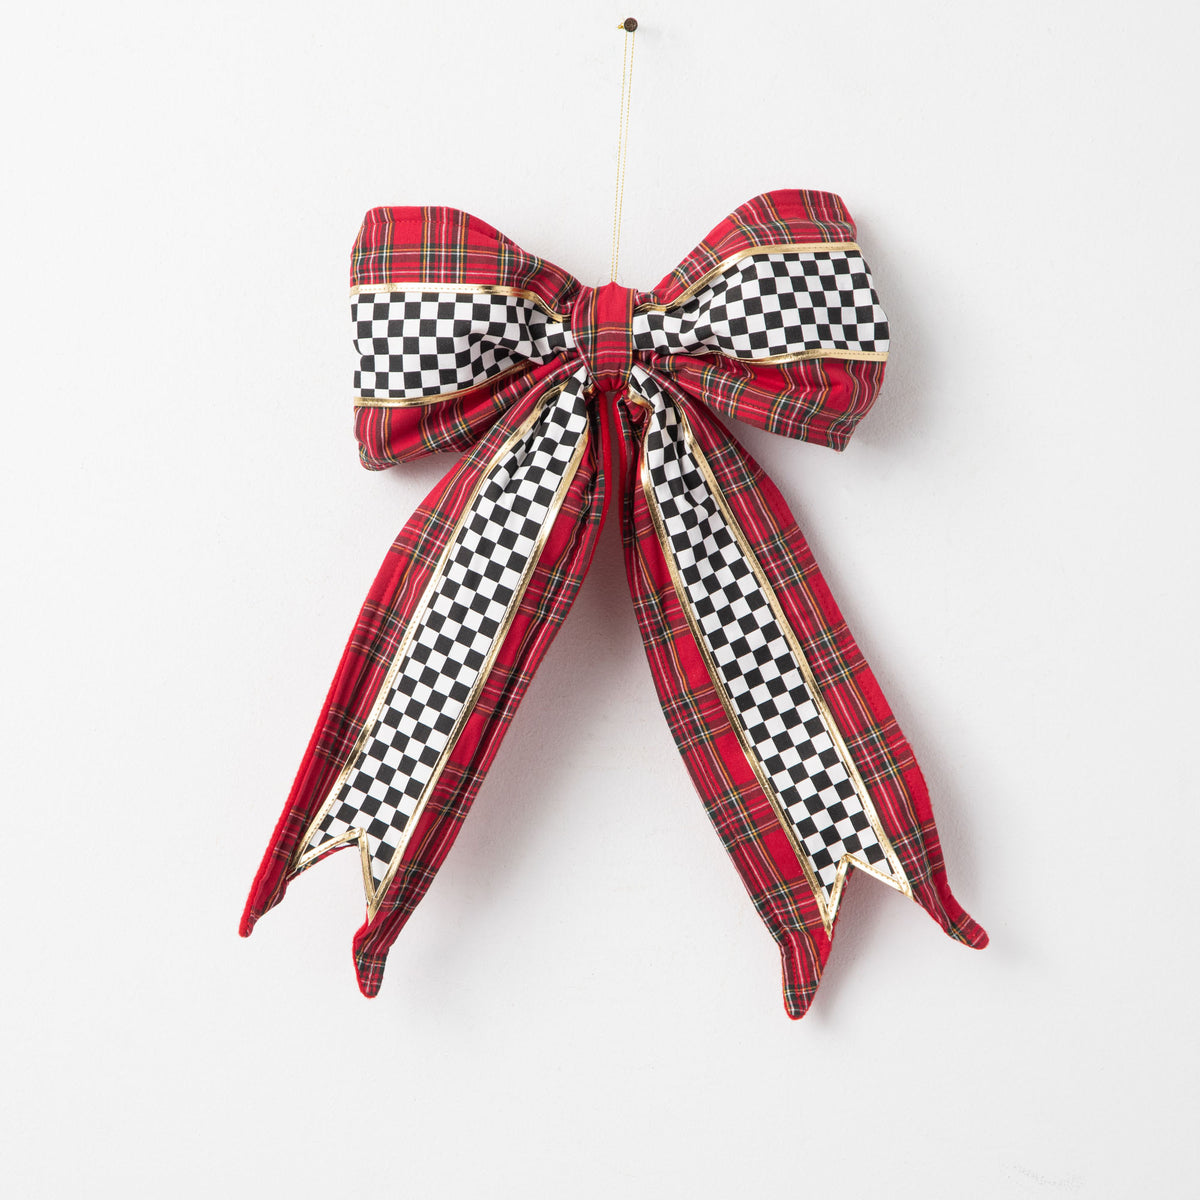 Slim Tartan Plaid Christmas Ribbon, Thin Checkered Trim in Red and Black,  Unique Ribbon for Bows and Decorations, Seasonal Wreaths 